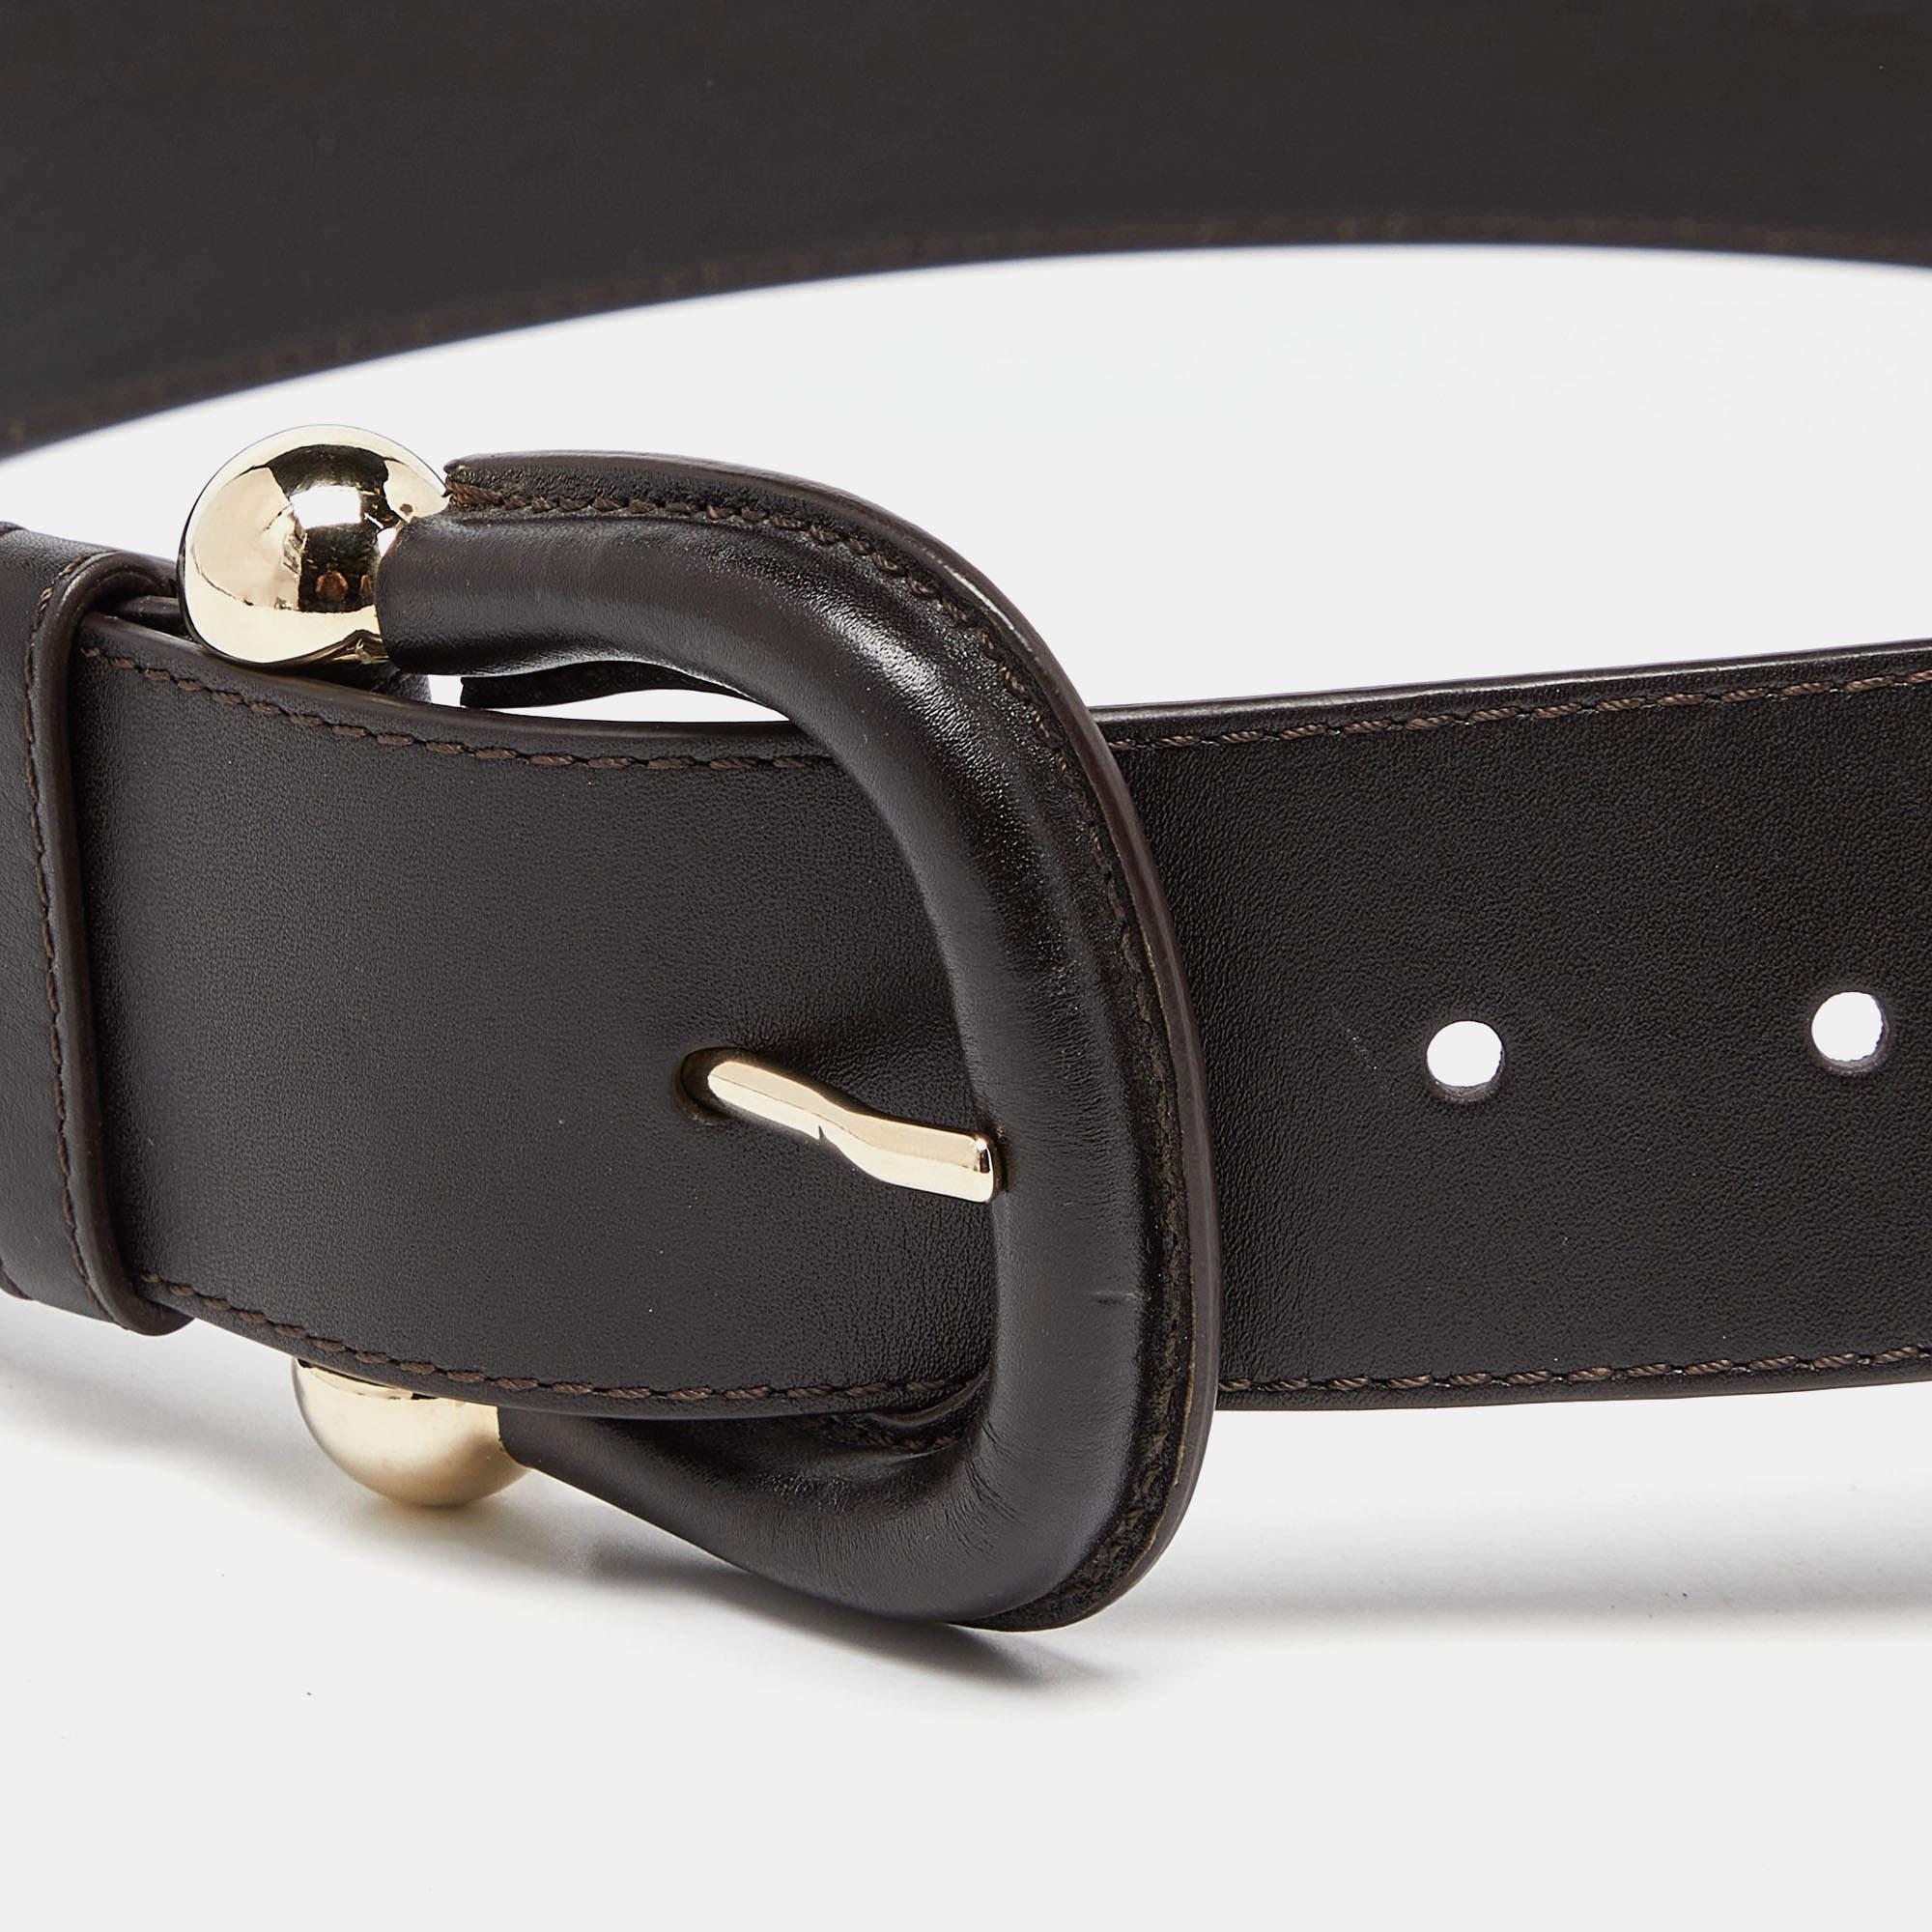 Belts are amazing accessories offering both functionality and style. If you're looking to add one, we have this fine choice by Burberry. It has a luxe look and a beautiful finish.

